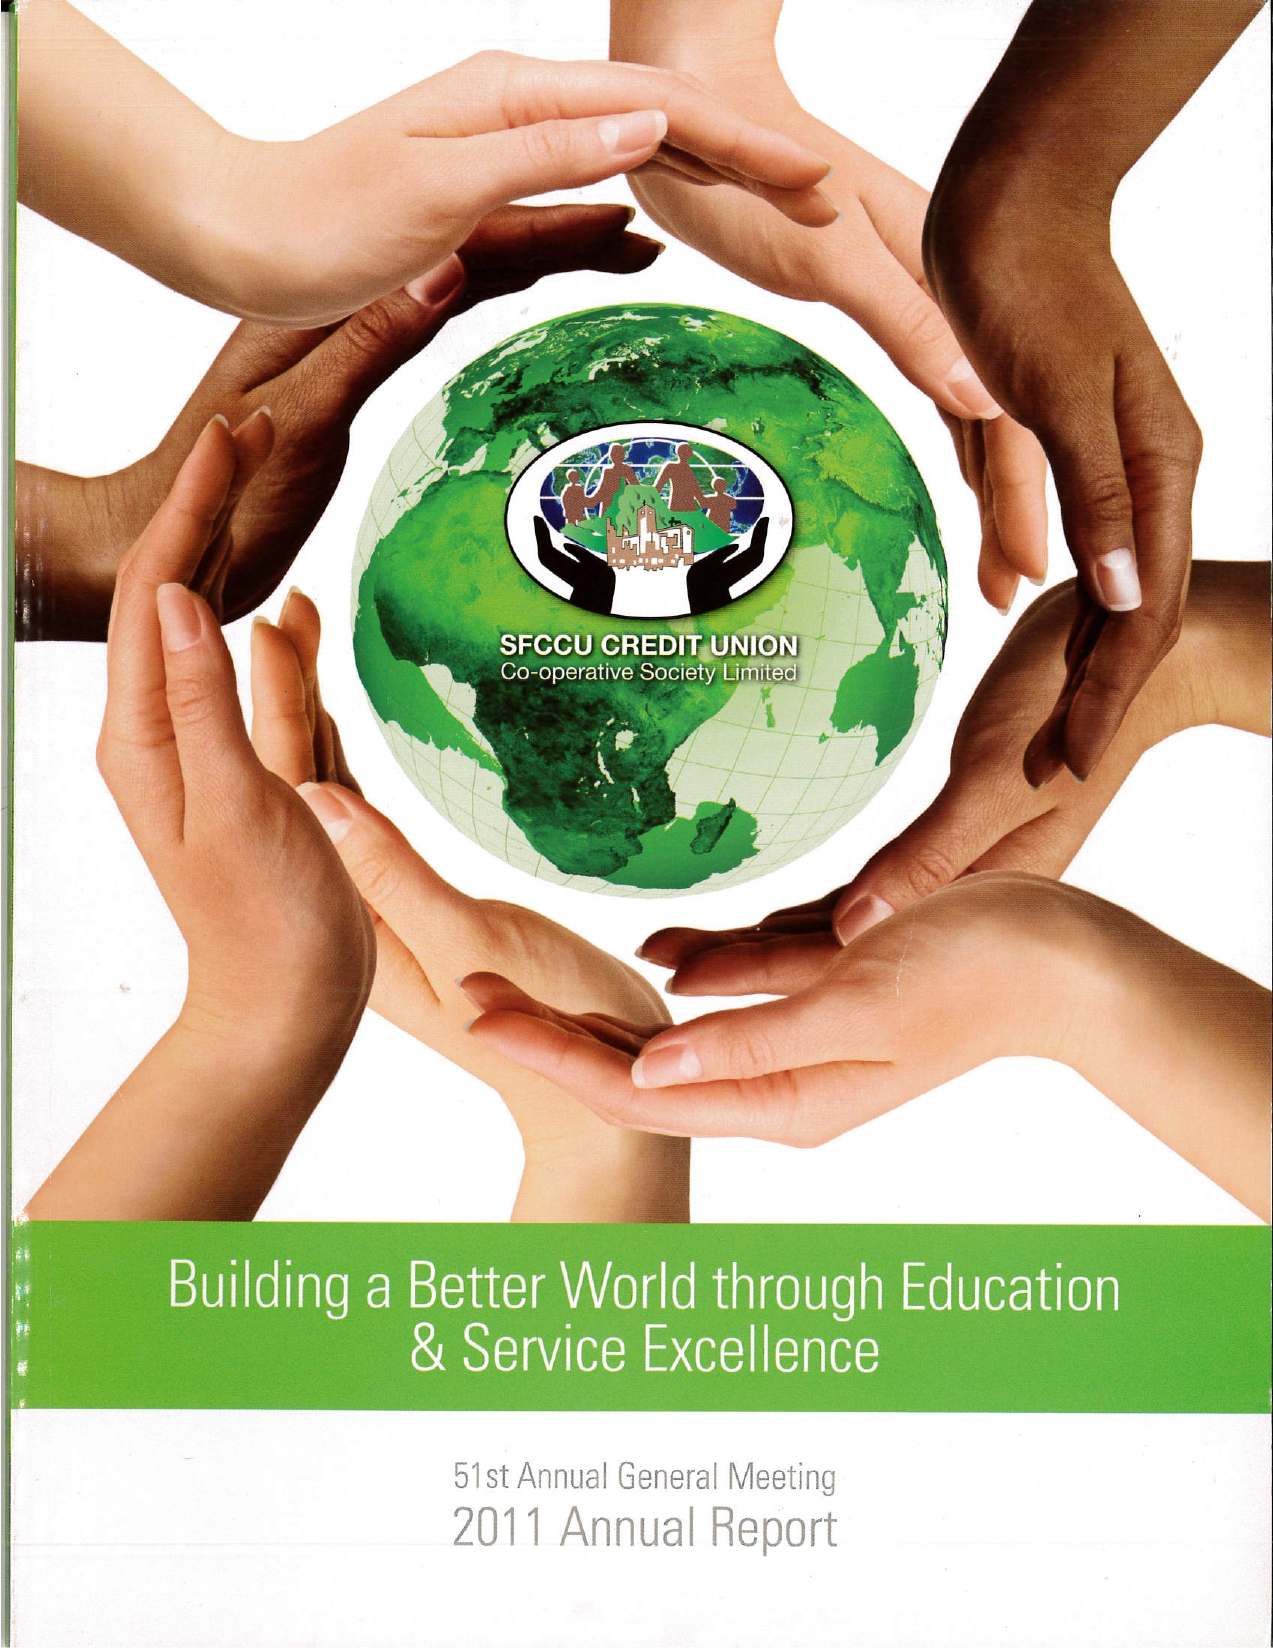 SFCCU Annual Report 2011 Cover_pages-to-jpg-0001